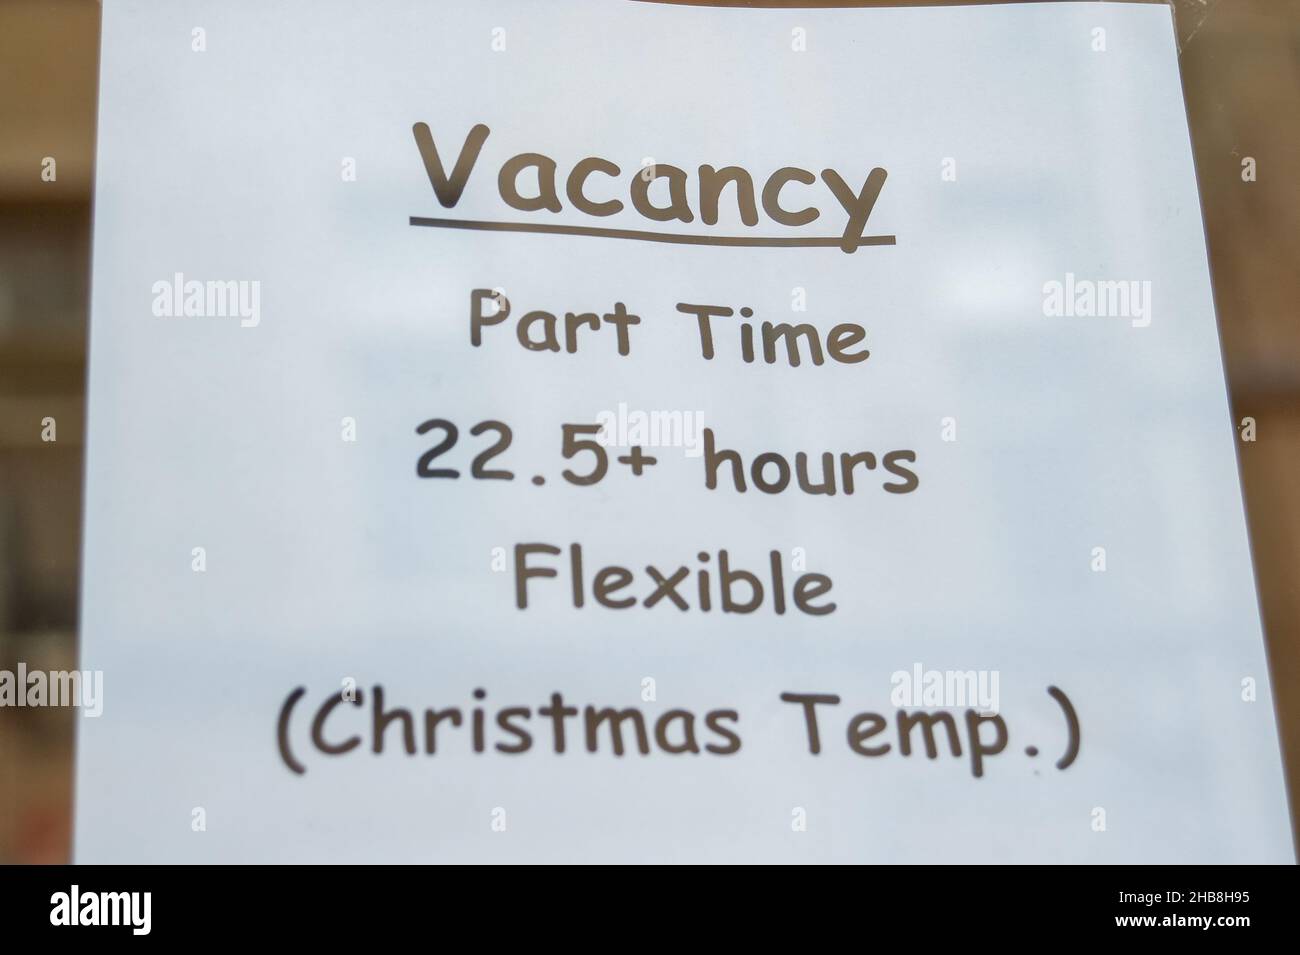 Windsor, Berkshire, UK. 17th December, 2021. A Christmas temp vacancy sign in a shop window as shops still struggle to recruit staff. Credit: Maureen McLean/Alamy Live News Stock Photo